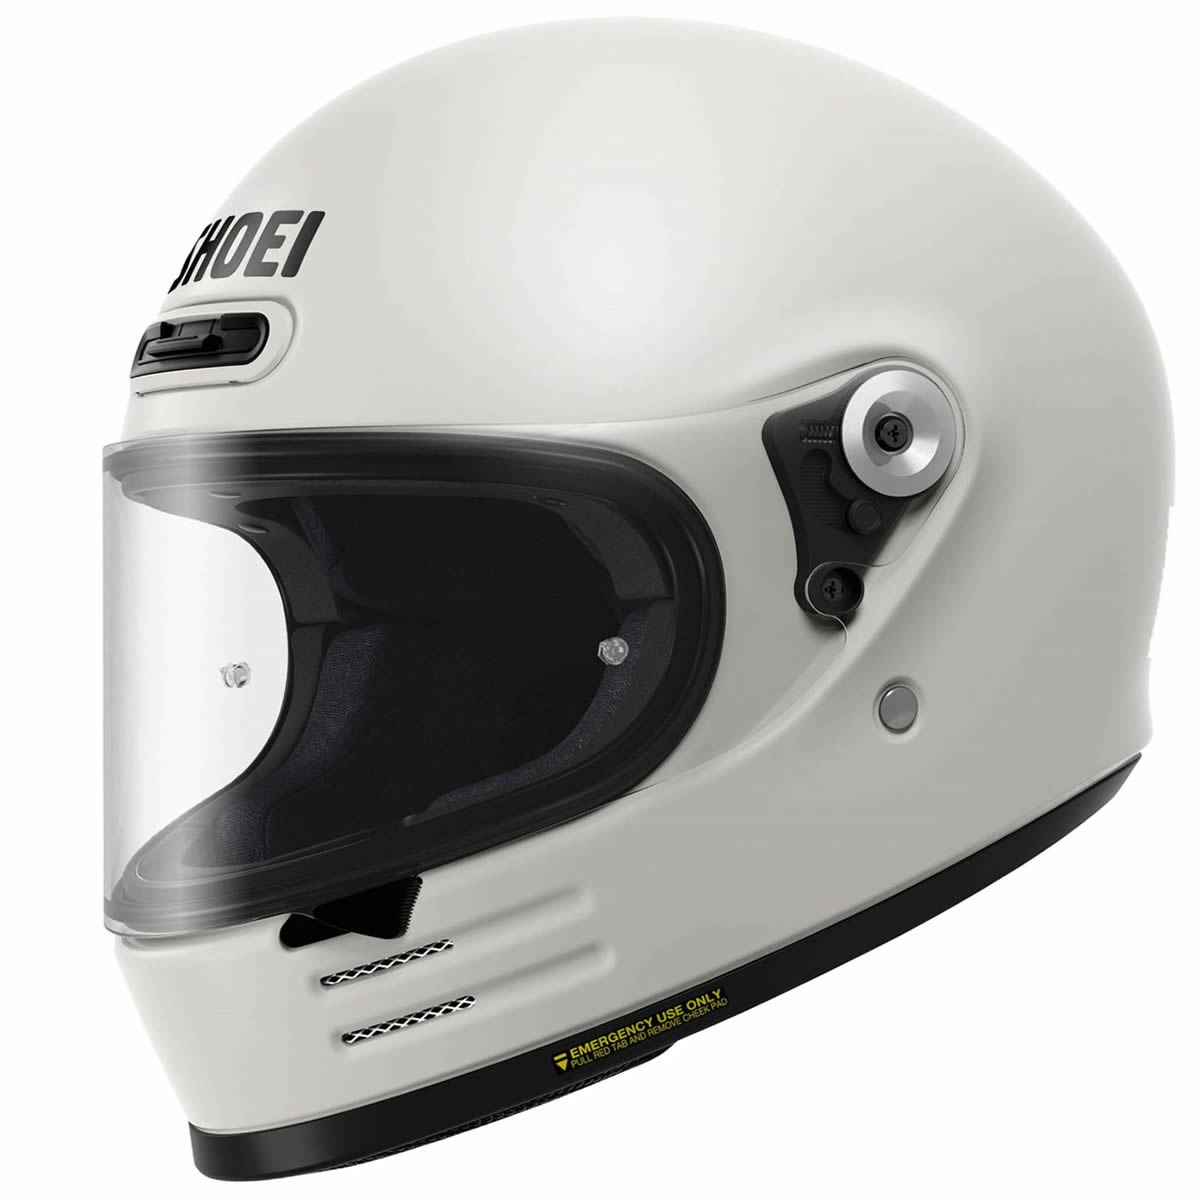 Shoei Glamster 06 Helm, weiss